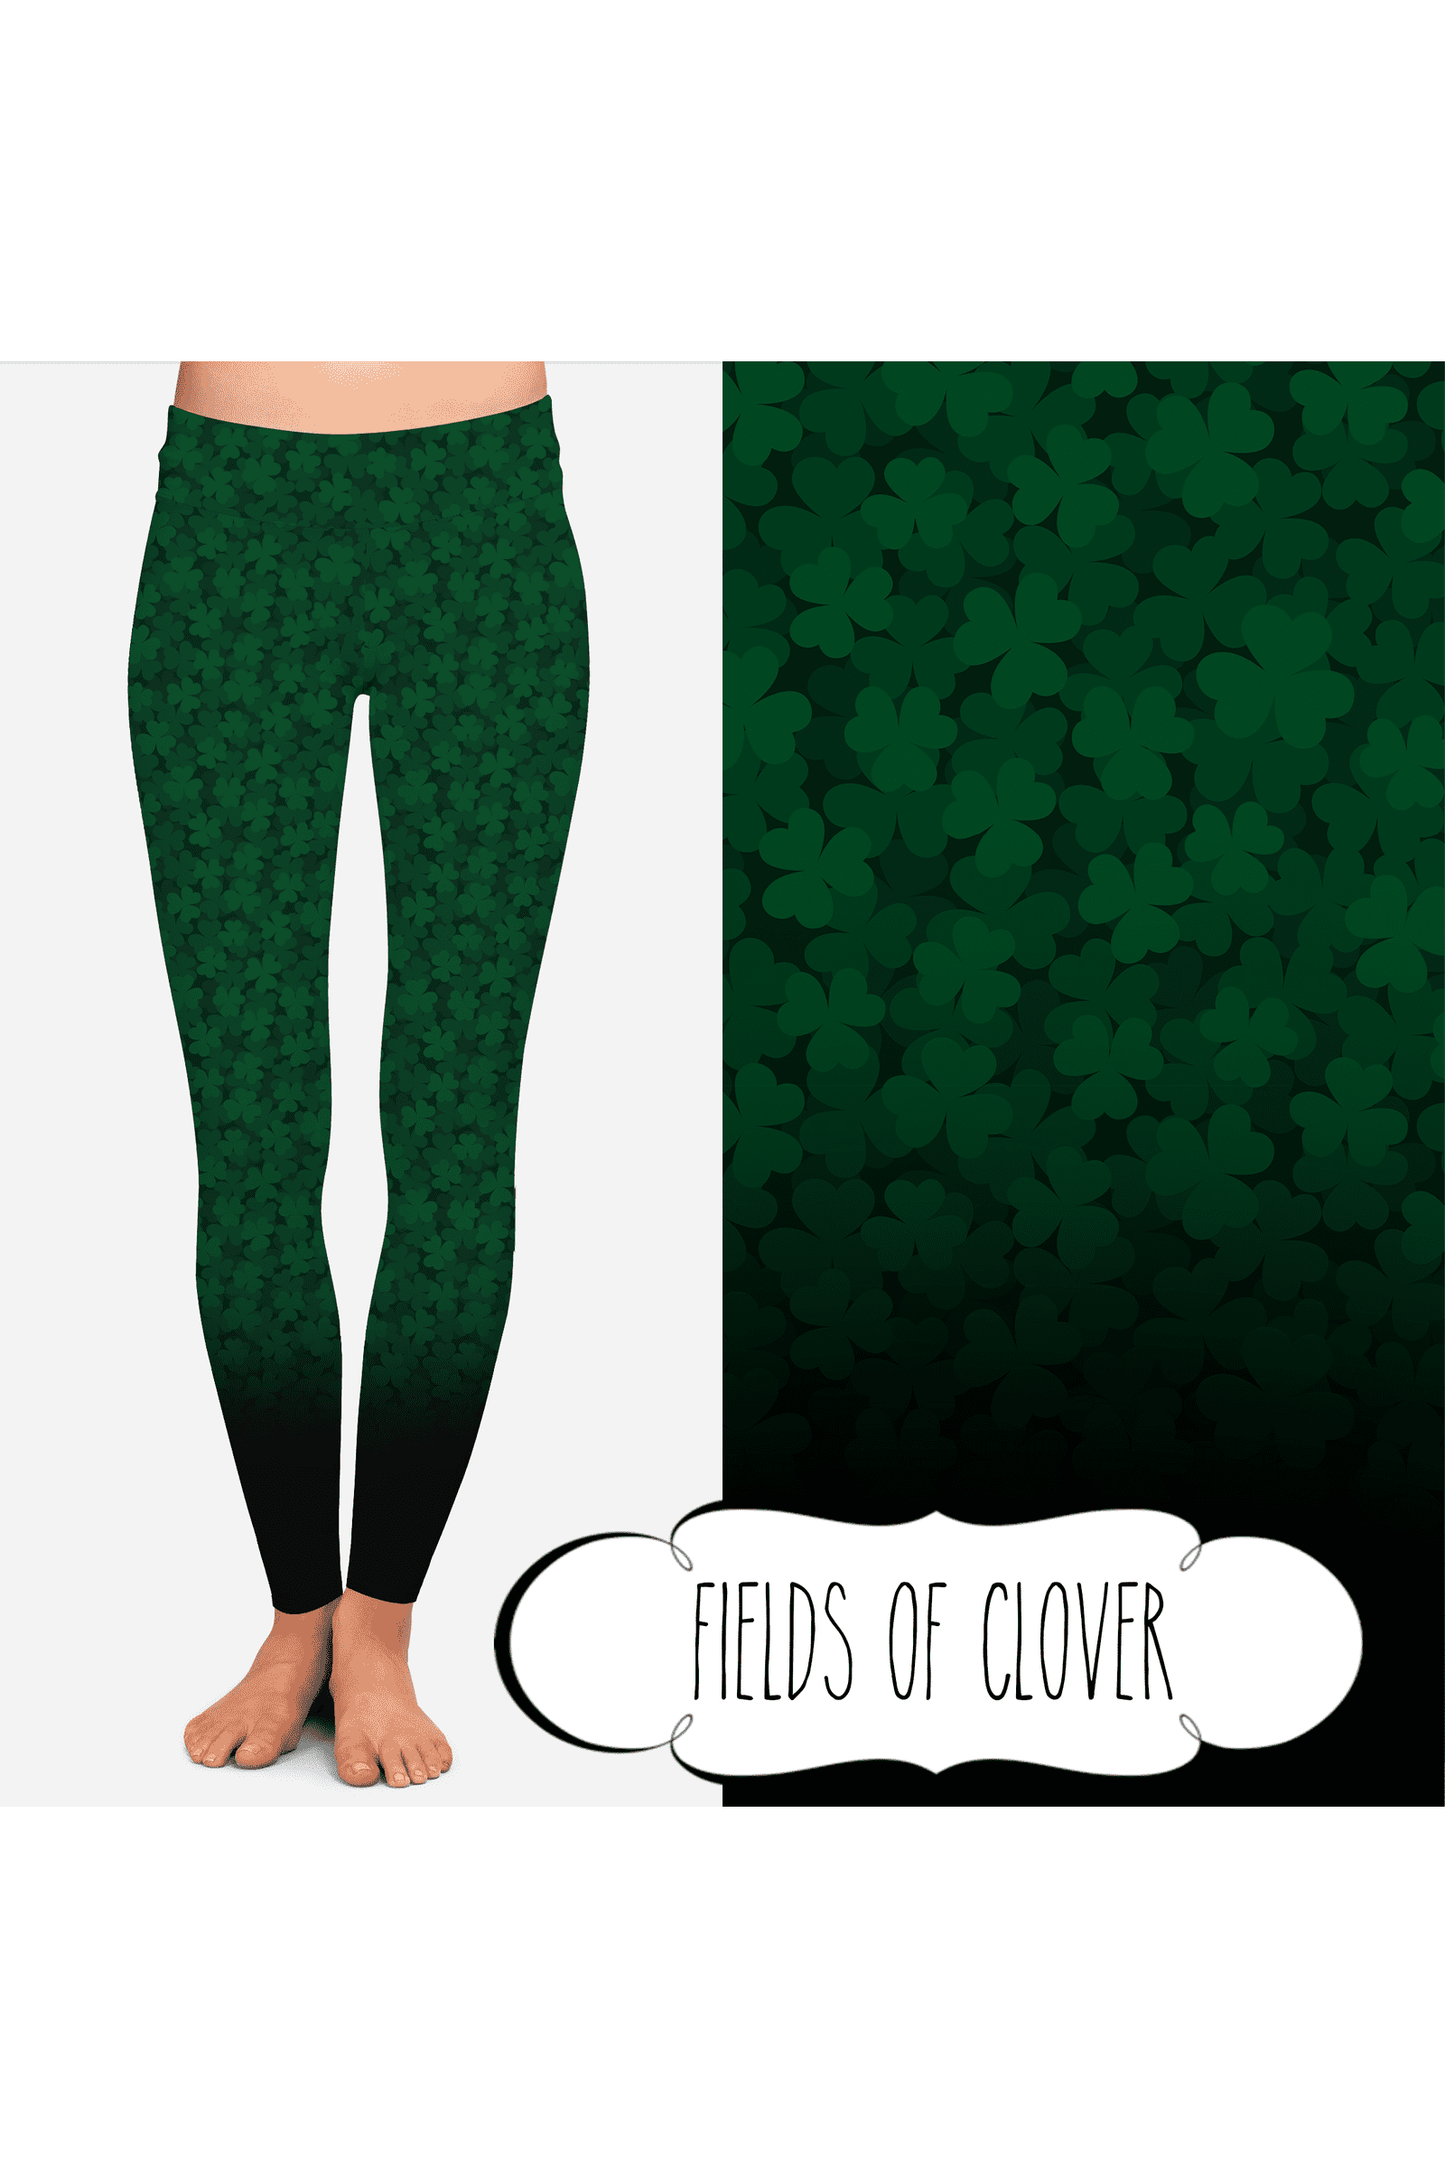 Yoga Style Leggings - Fields Of Clover by Eleven & Co.